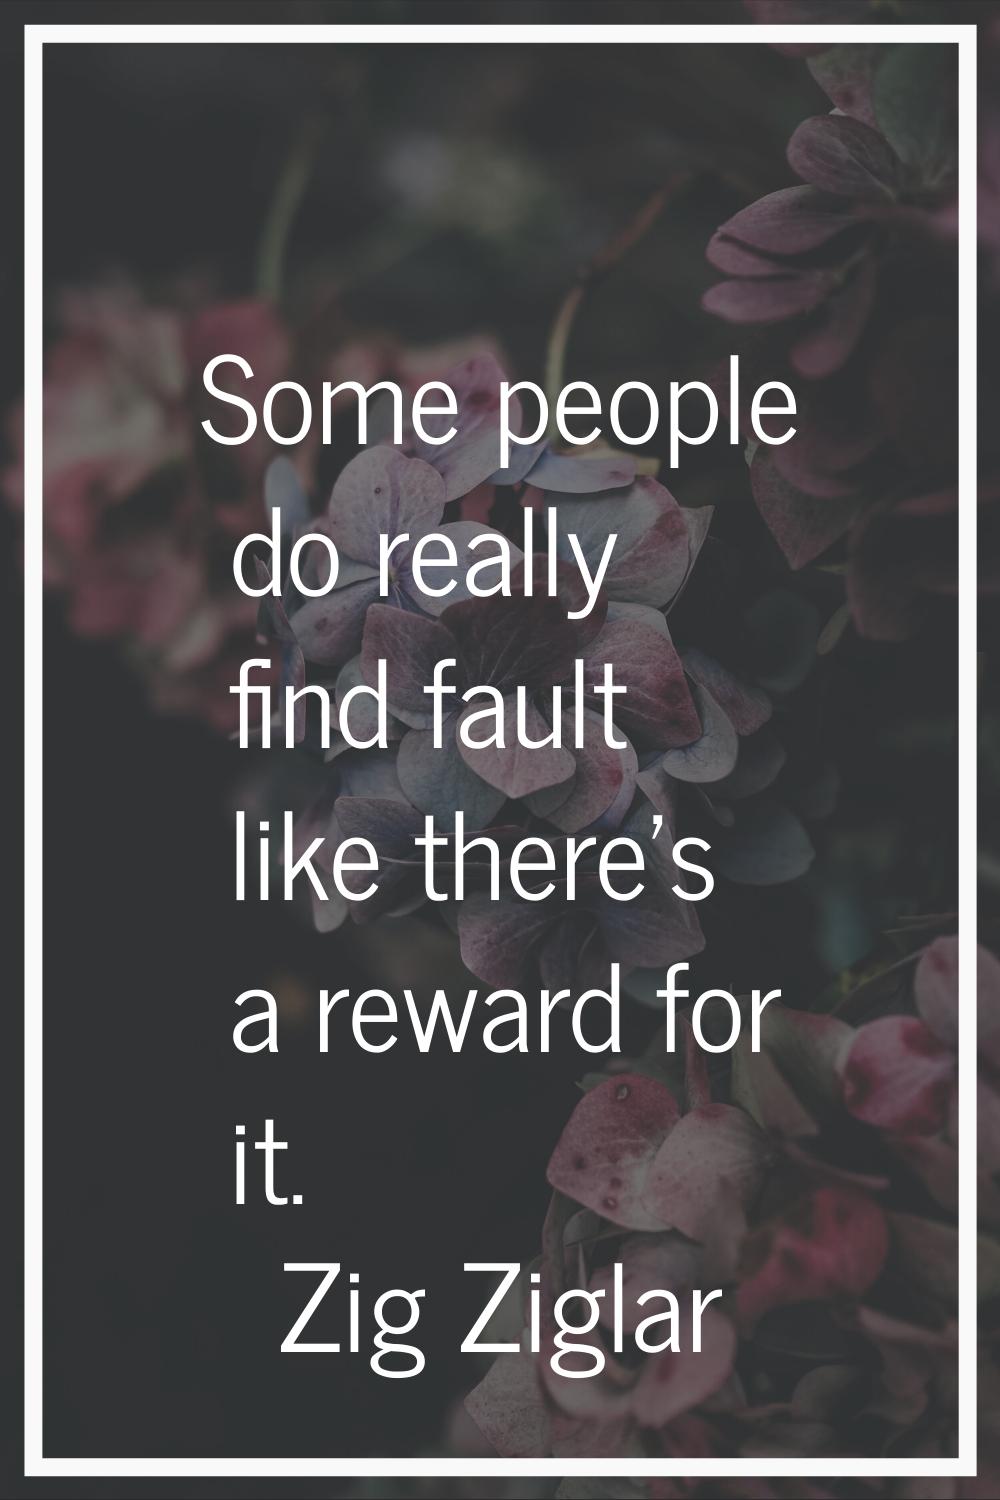 Some people do really find fault like there's a reward for it.